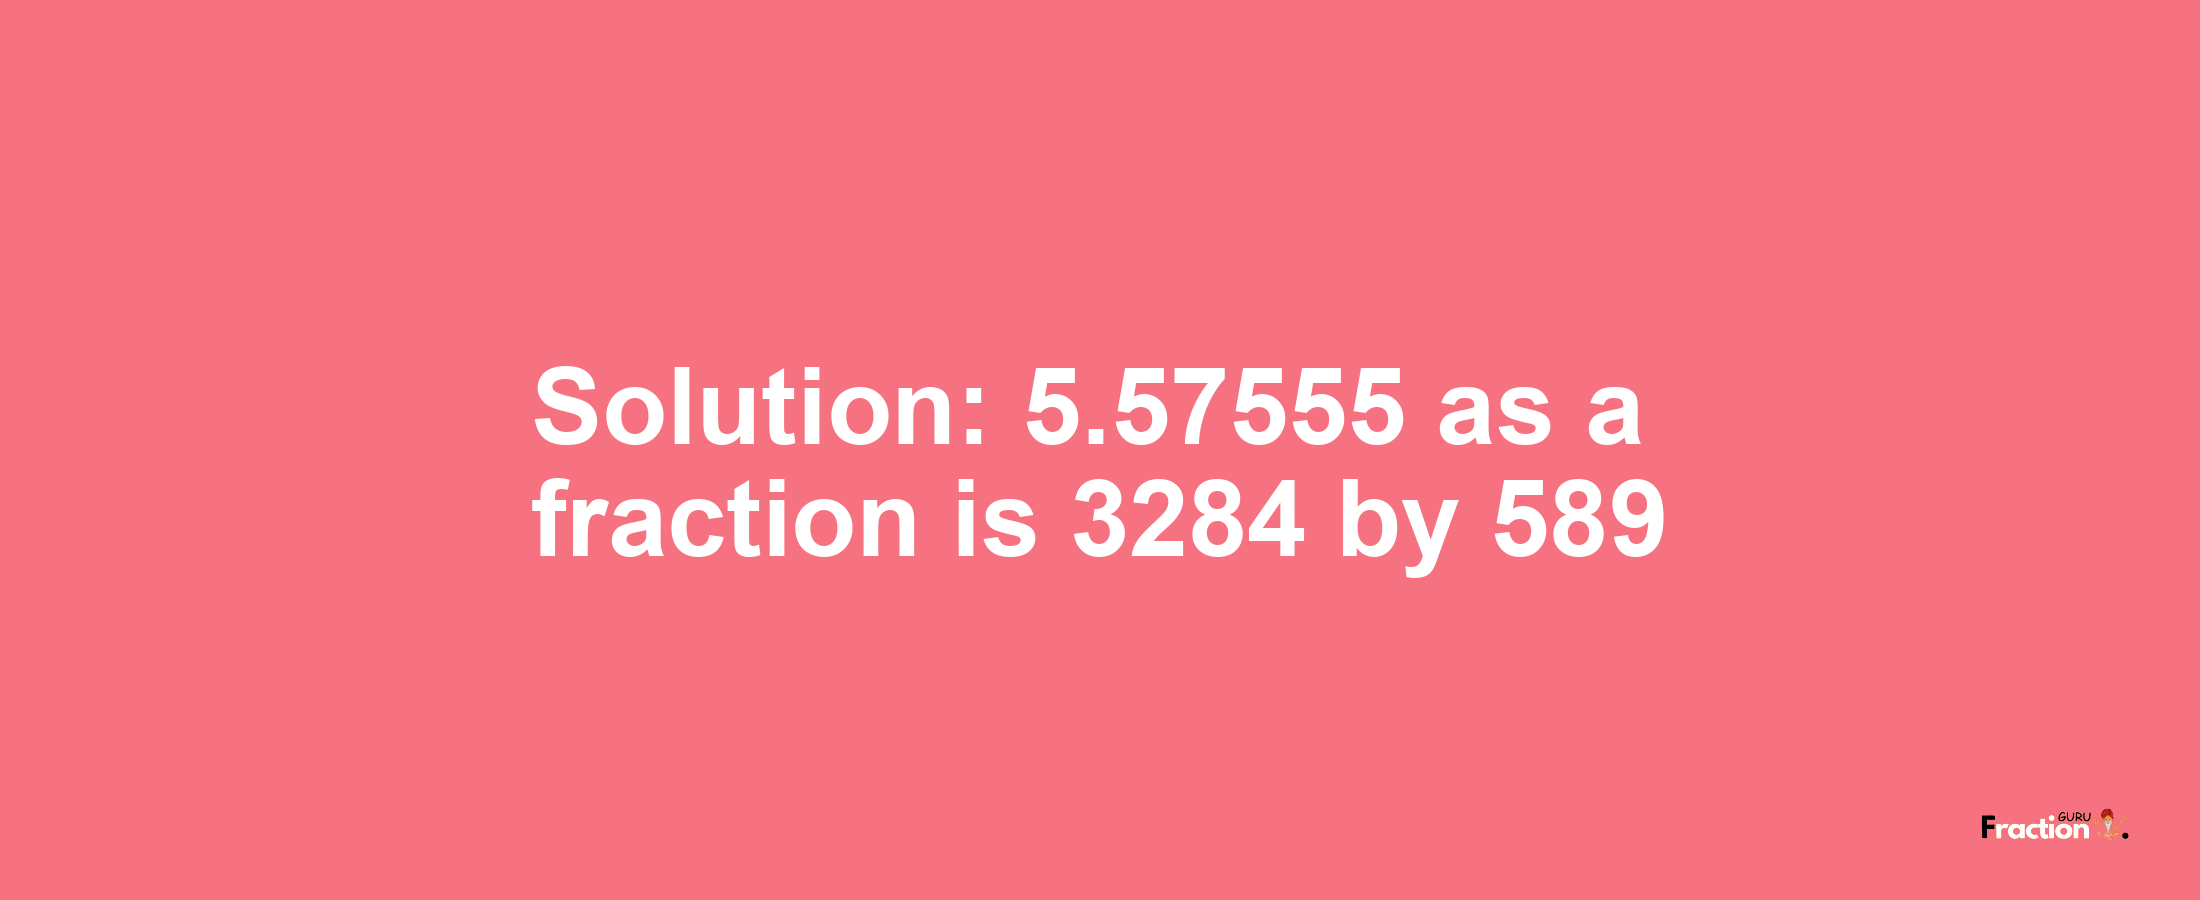 Solution:5.57555 as a fraction is 3284/589